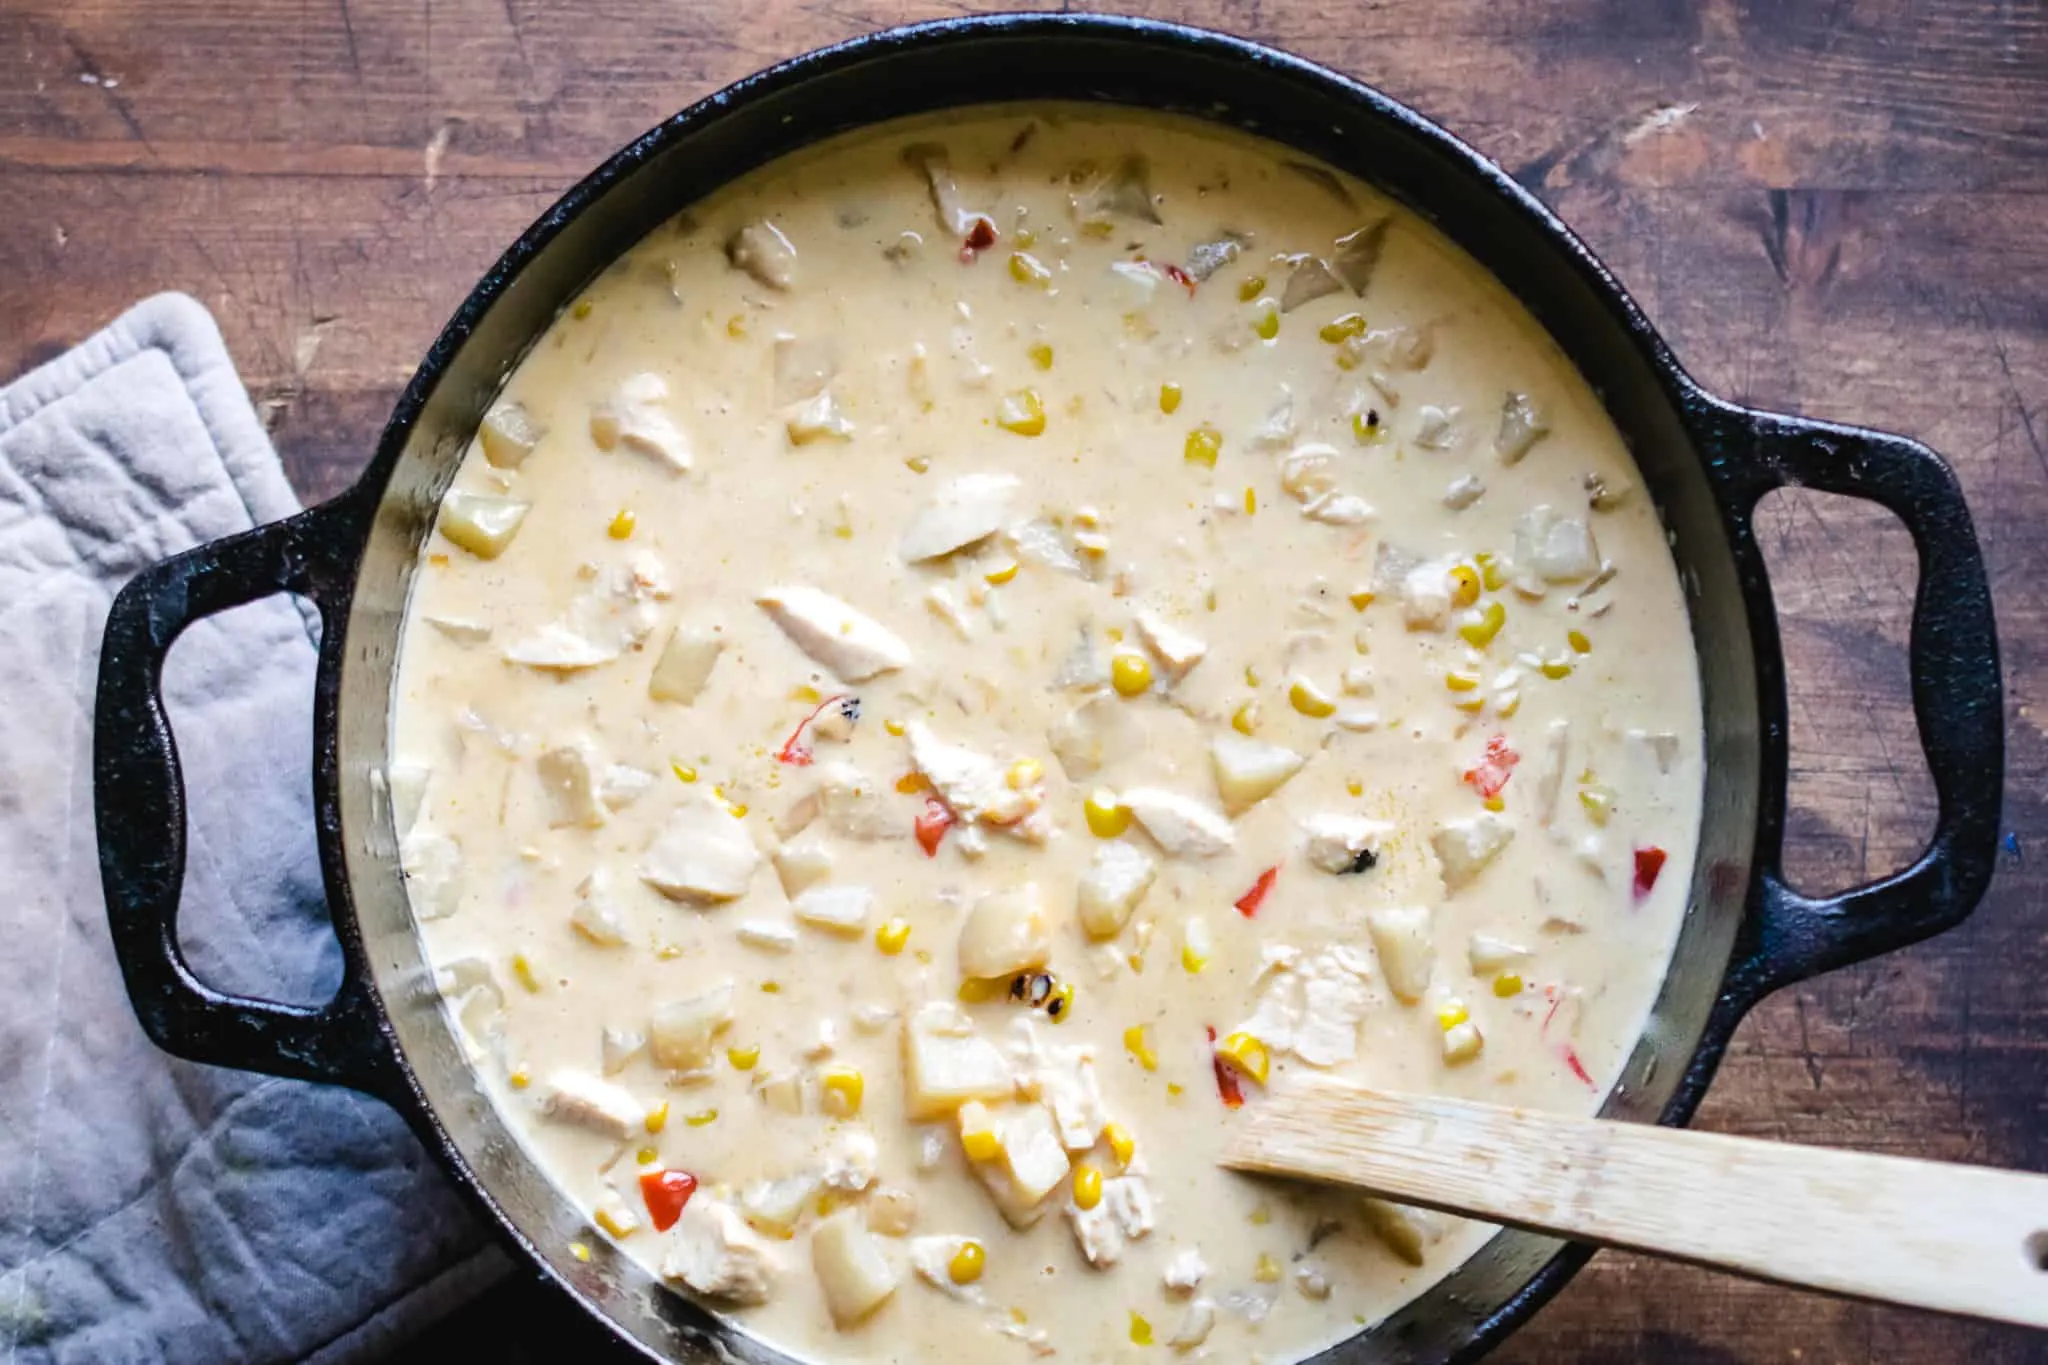 cast iron dutch oven full of creamy chicken and cheese corn chowder with wooden spoon